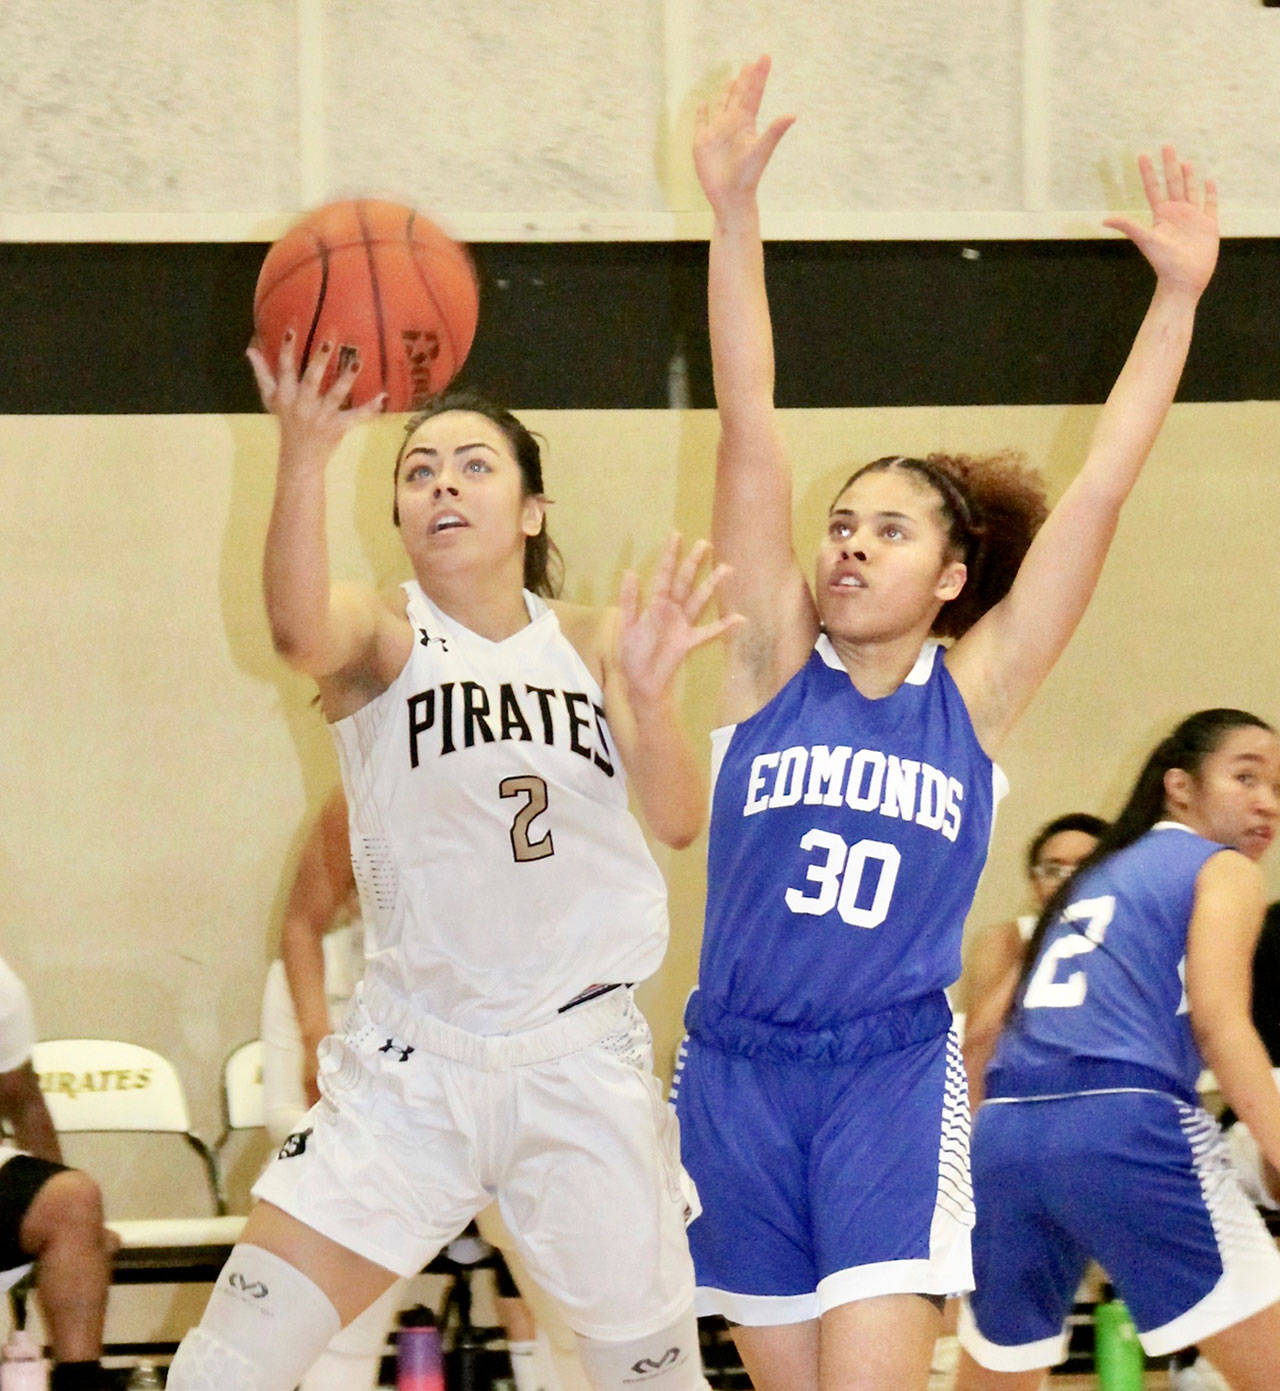 Peninsula’s Leilani Padilla (2), was the Pirates’ leading scorer last year. She has already scored 24 points in a game this year and looks to help lead the Pirates to a back-to-back North Division championship. (Dave Logan/for Peninsula Daily News)